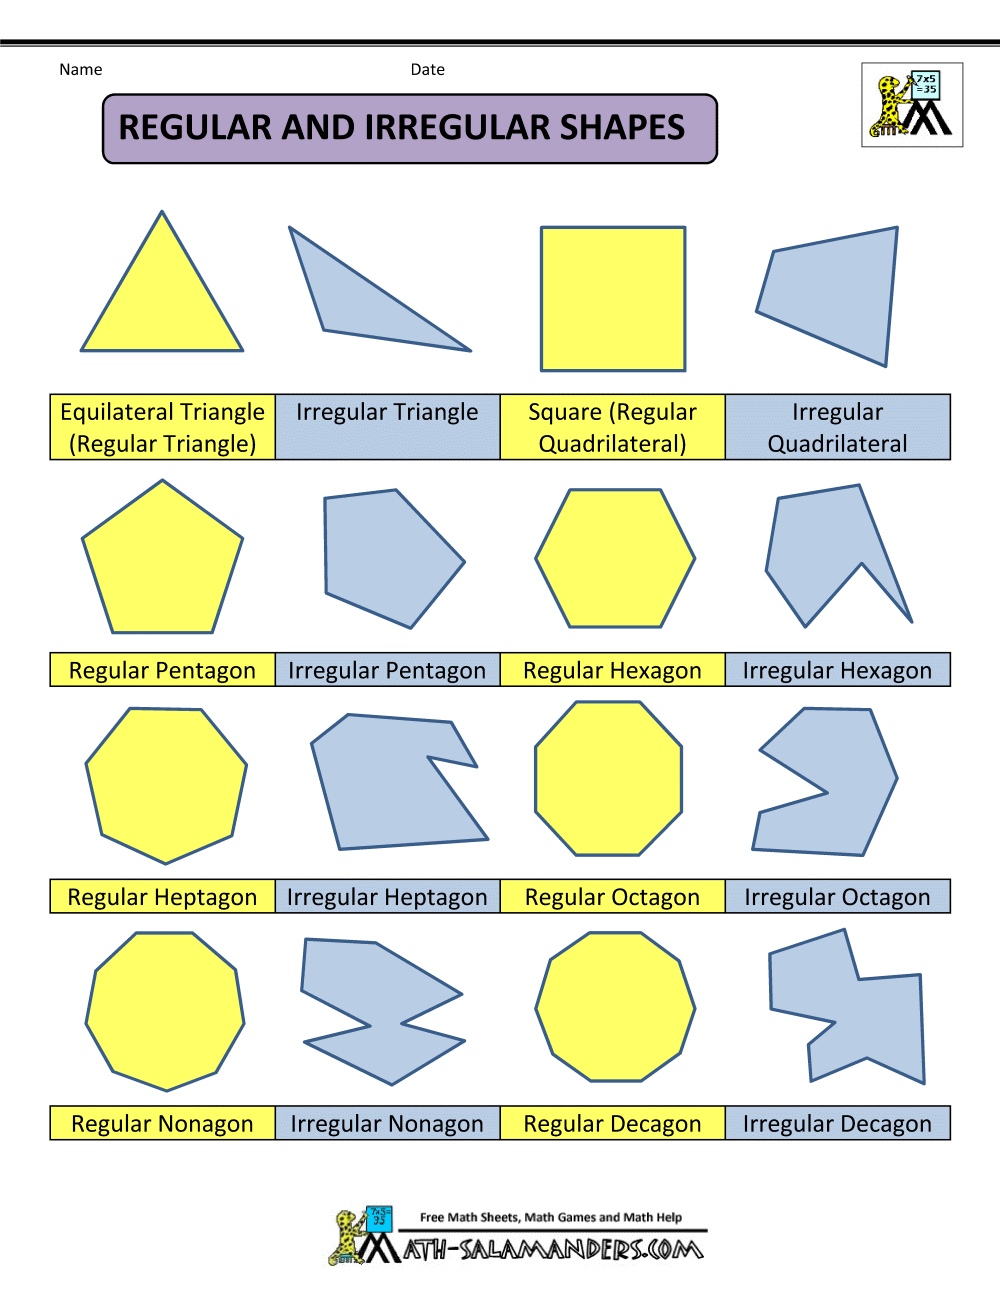 english-geometric-shapes-names-definition-and-examples-table-of